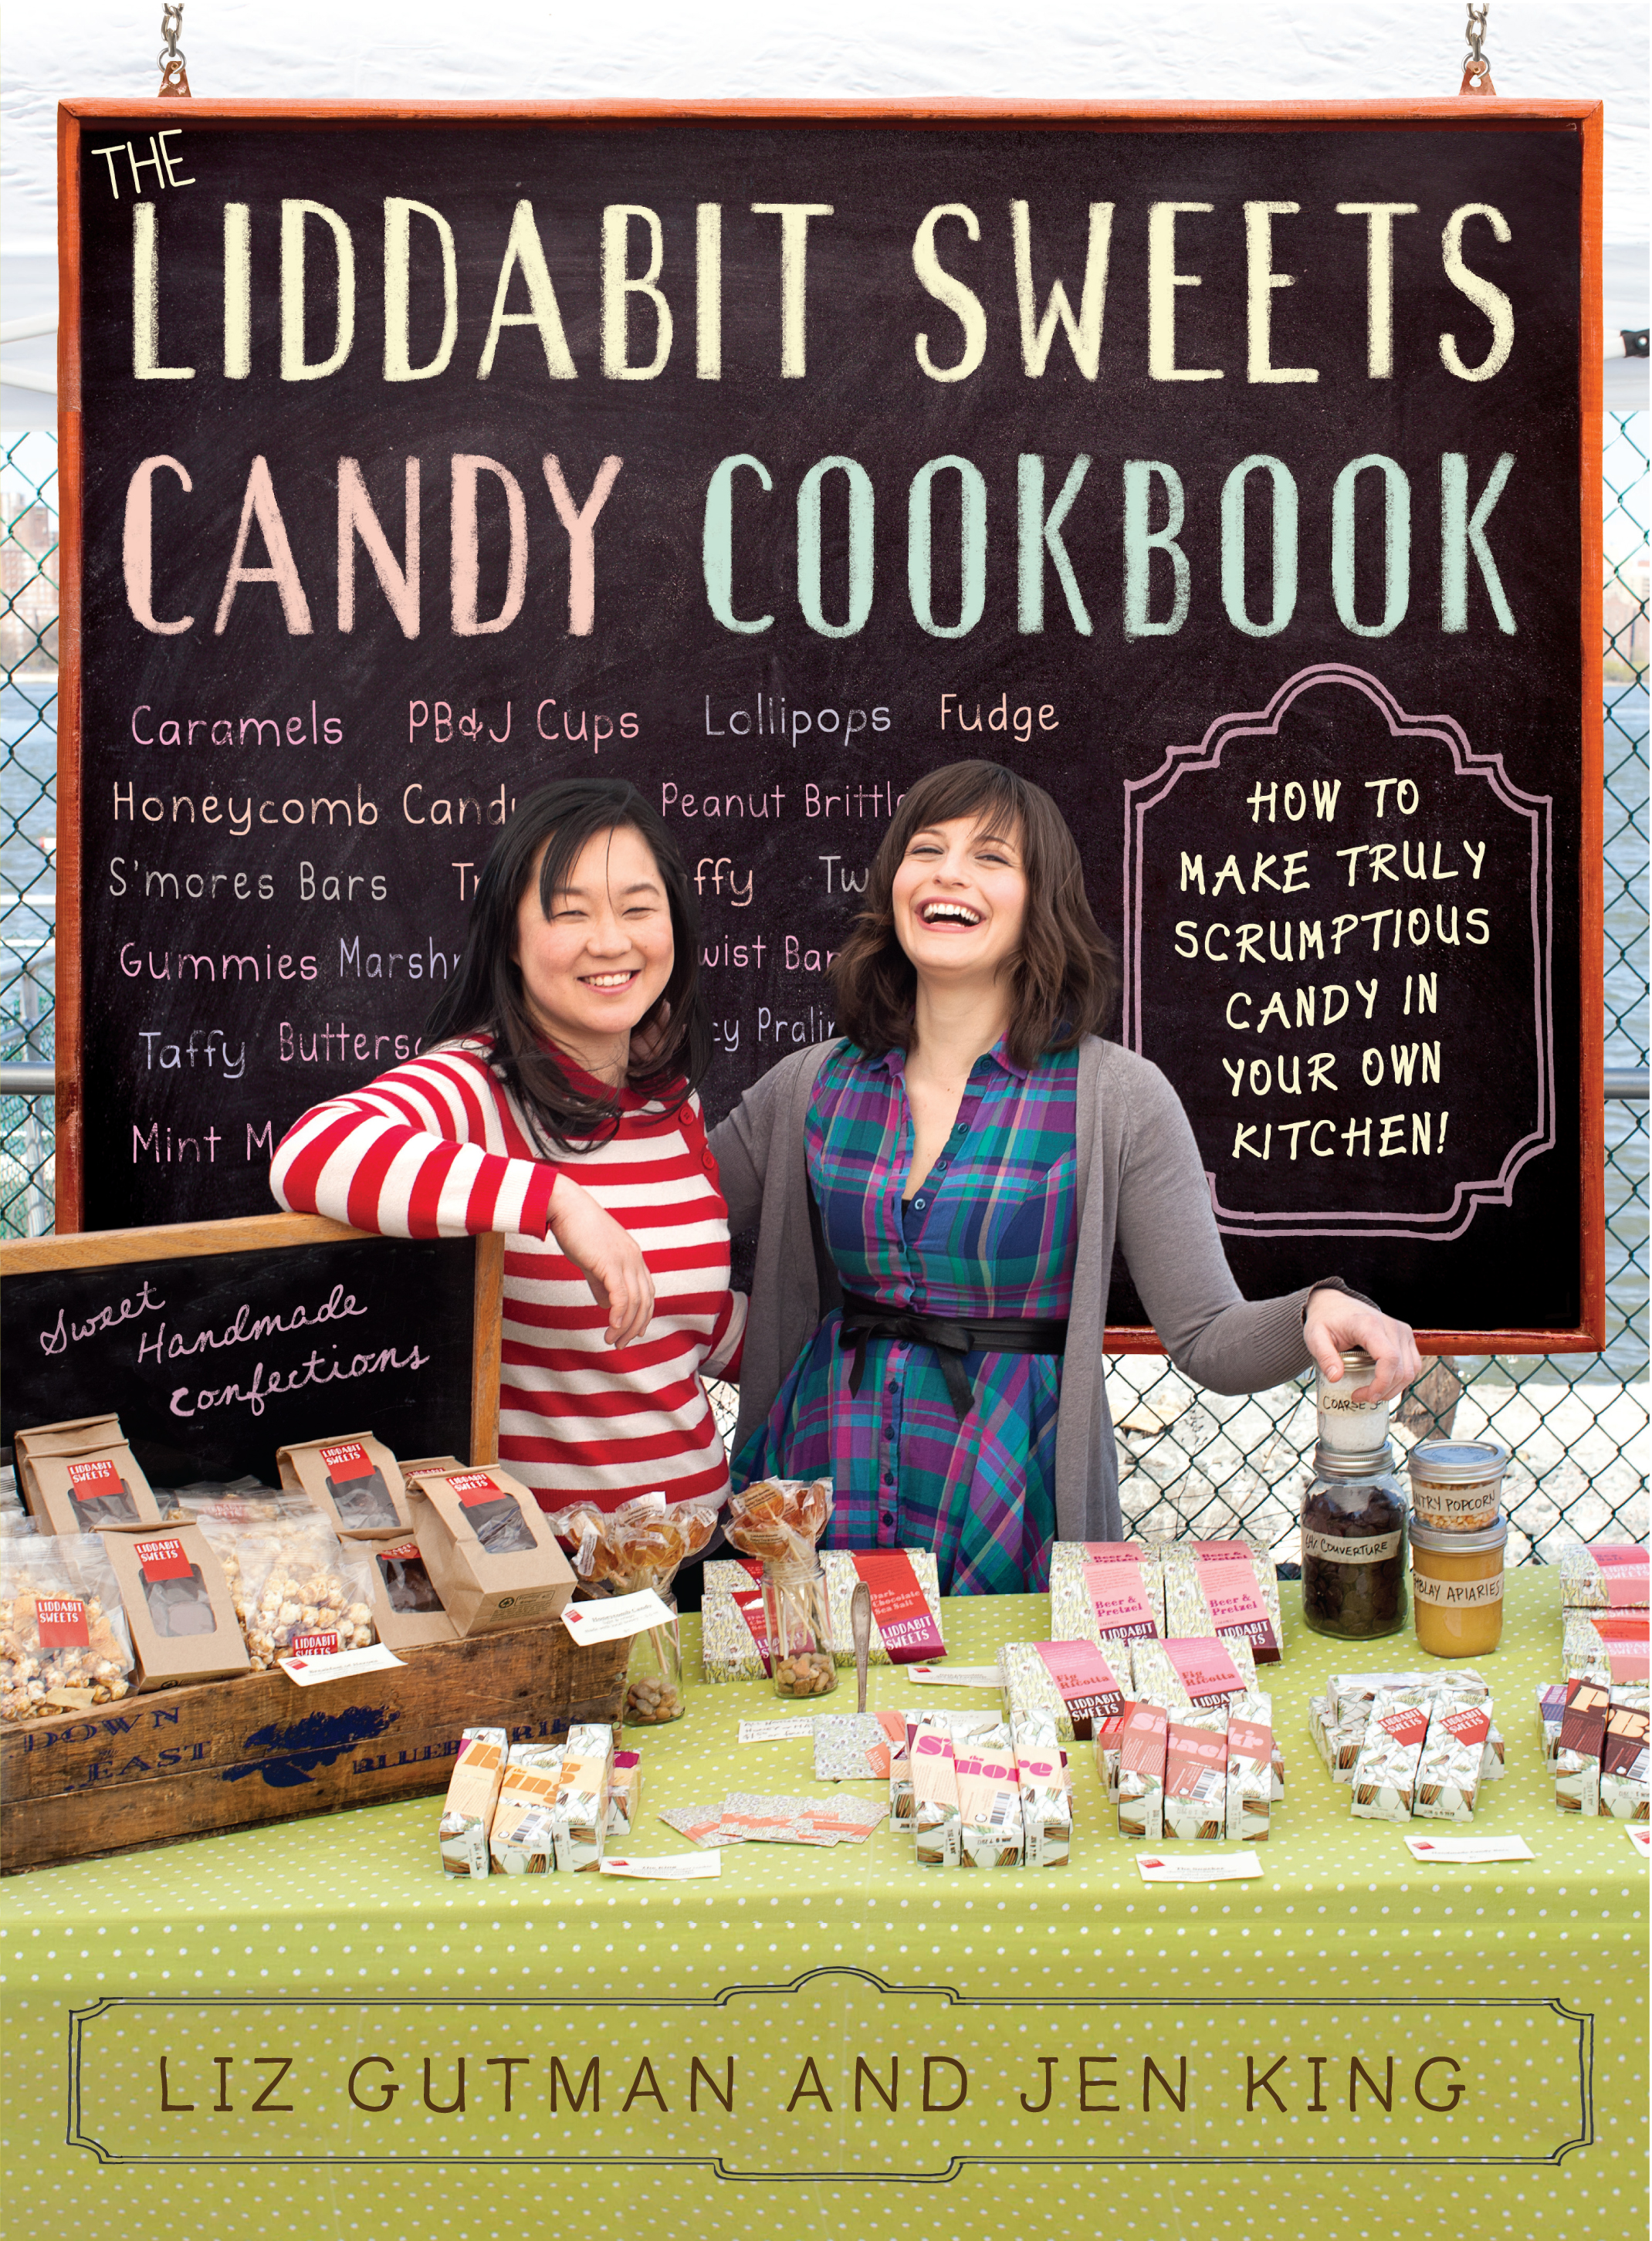 Liddabit Sweets Candy Cookbook Book cover